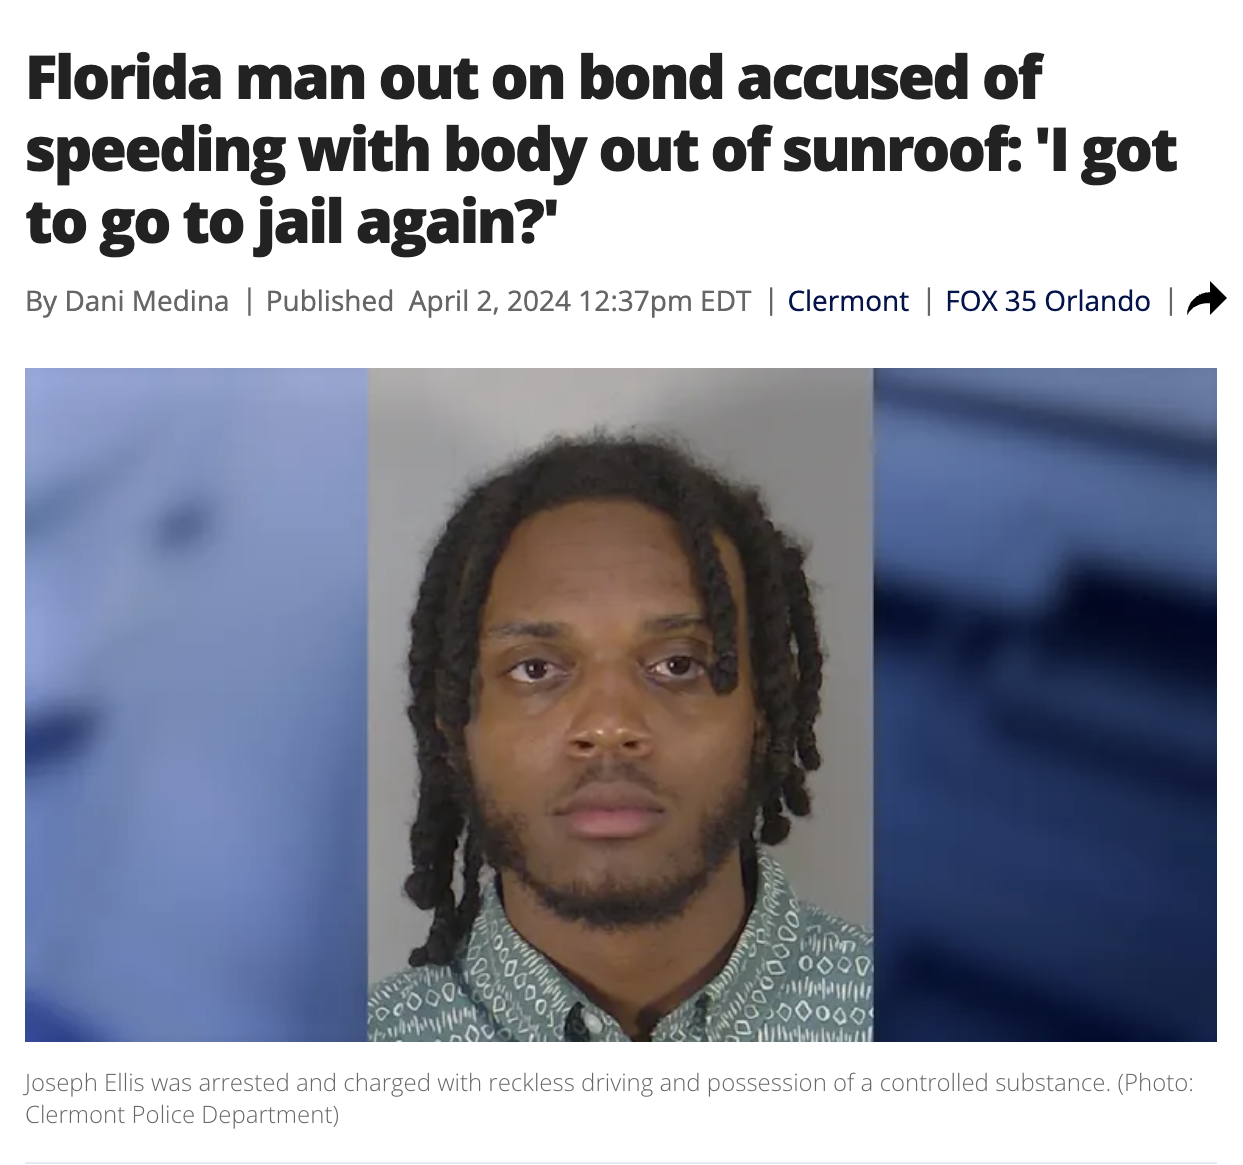 photo caption - Florida man out on bond accused of speeding with body out of sunroof 'I got to go to jail again?" By Dani Medina | Published pm Edt | Clermont | Fox 35 Orlando | 100000 100000 Joseph Ellis was arrested and charged with reckless driving and